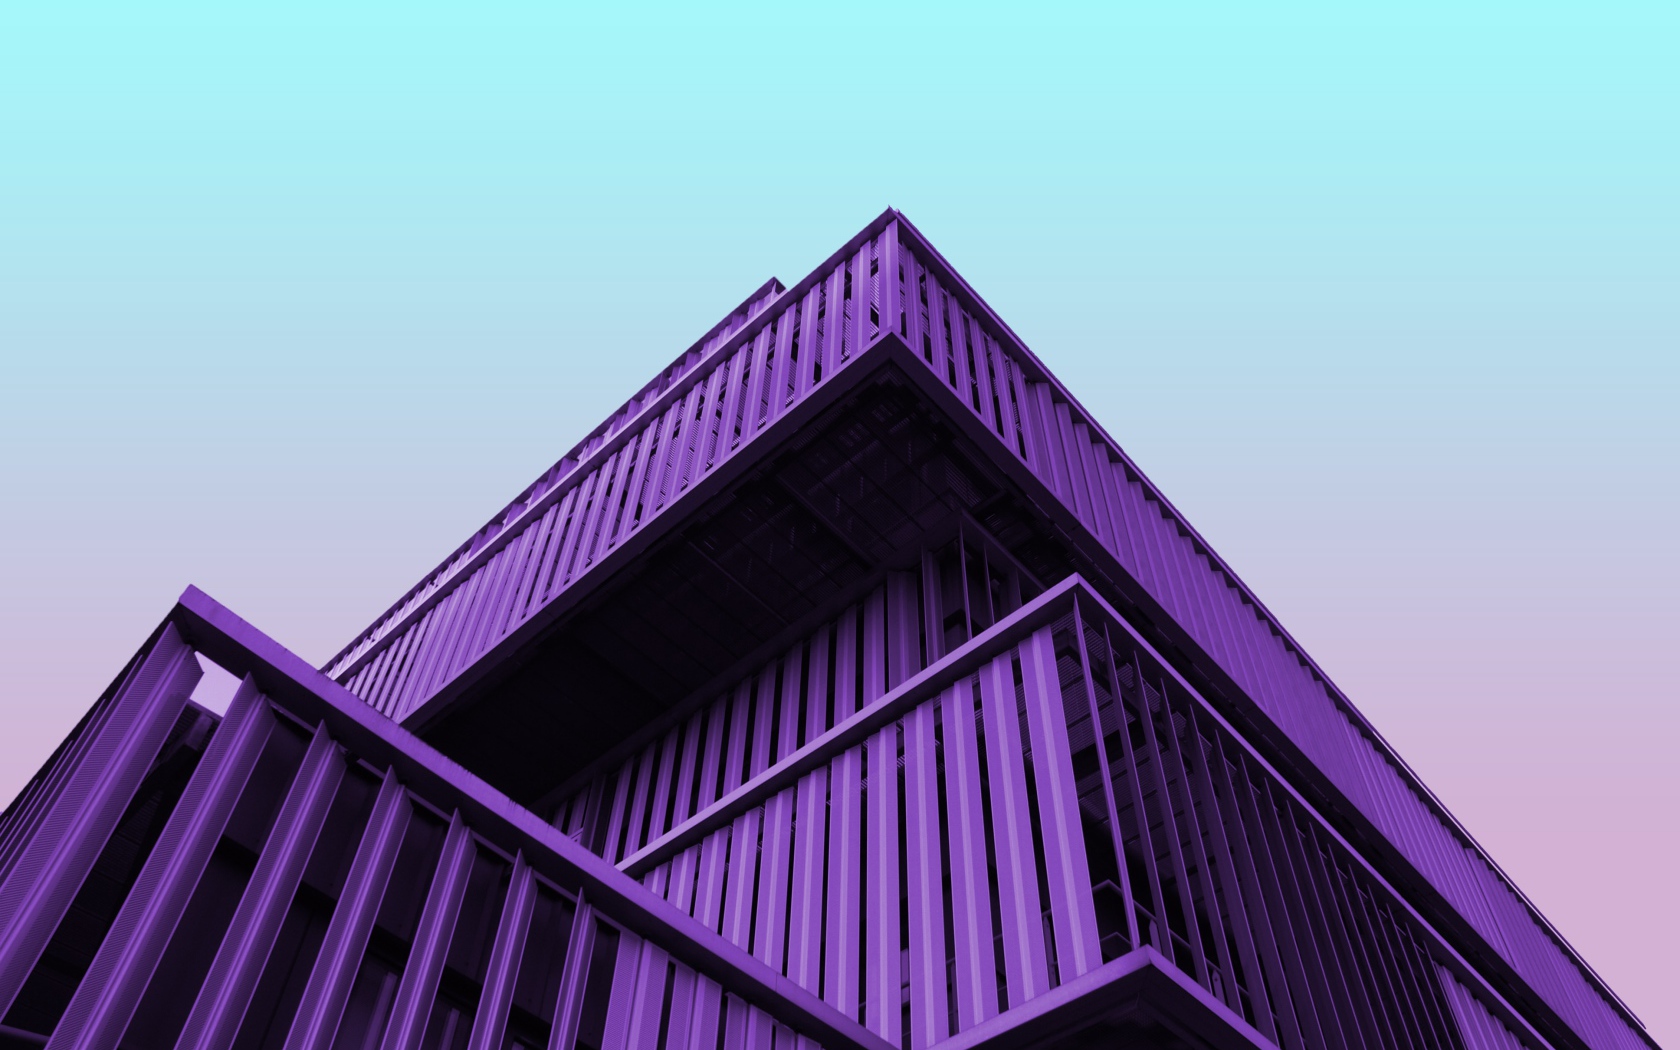 Purple architectural building on a blue background